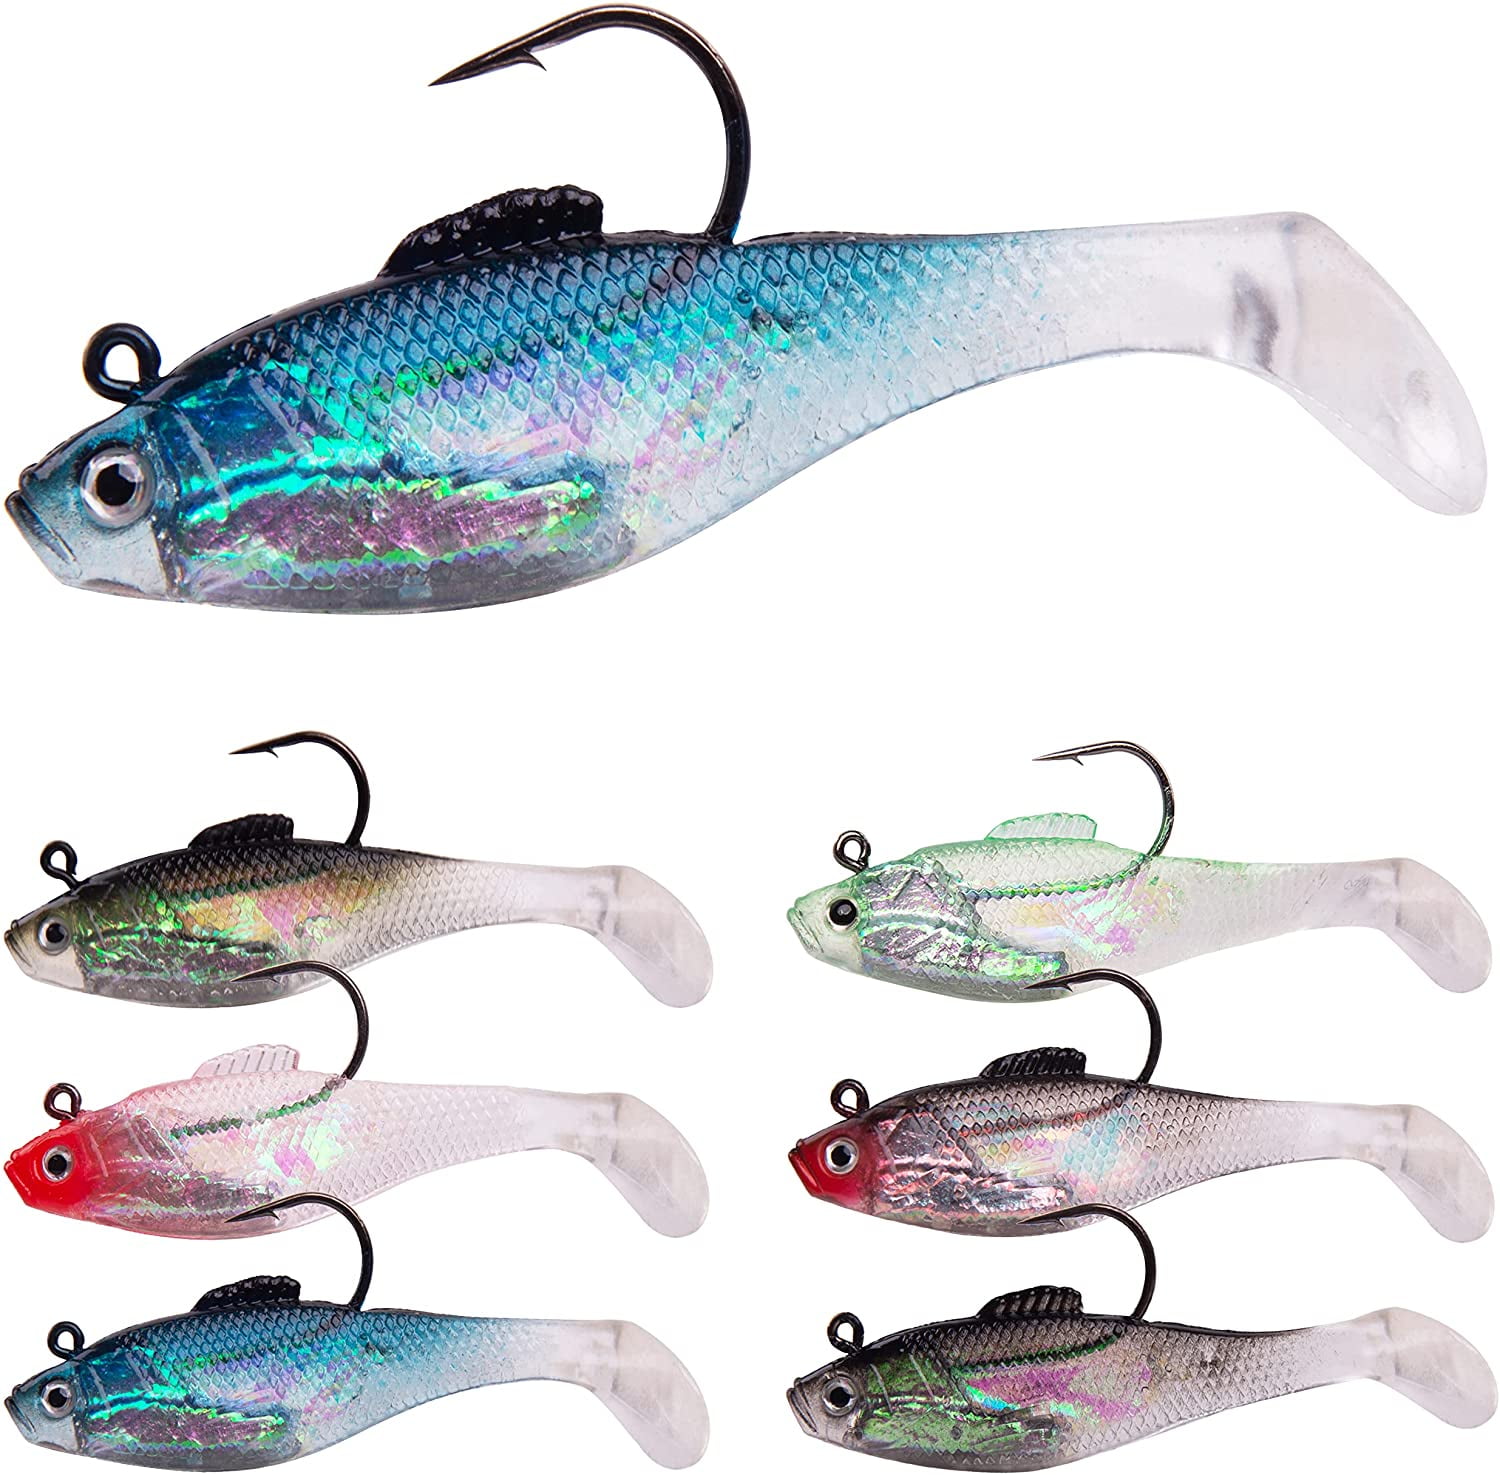 Fishing Jig Head Swim Shad Lures, 6Pcs Soft Fishing Lures Swim Baits with  Sharp Hook for Bass Pre-Rigged Swimbaits with Spinner Paddle Tail for